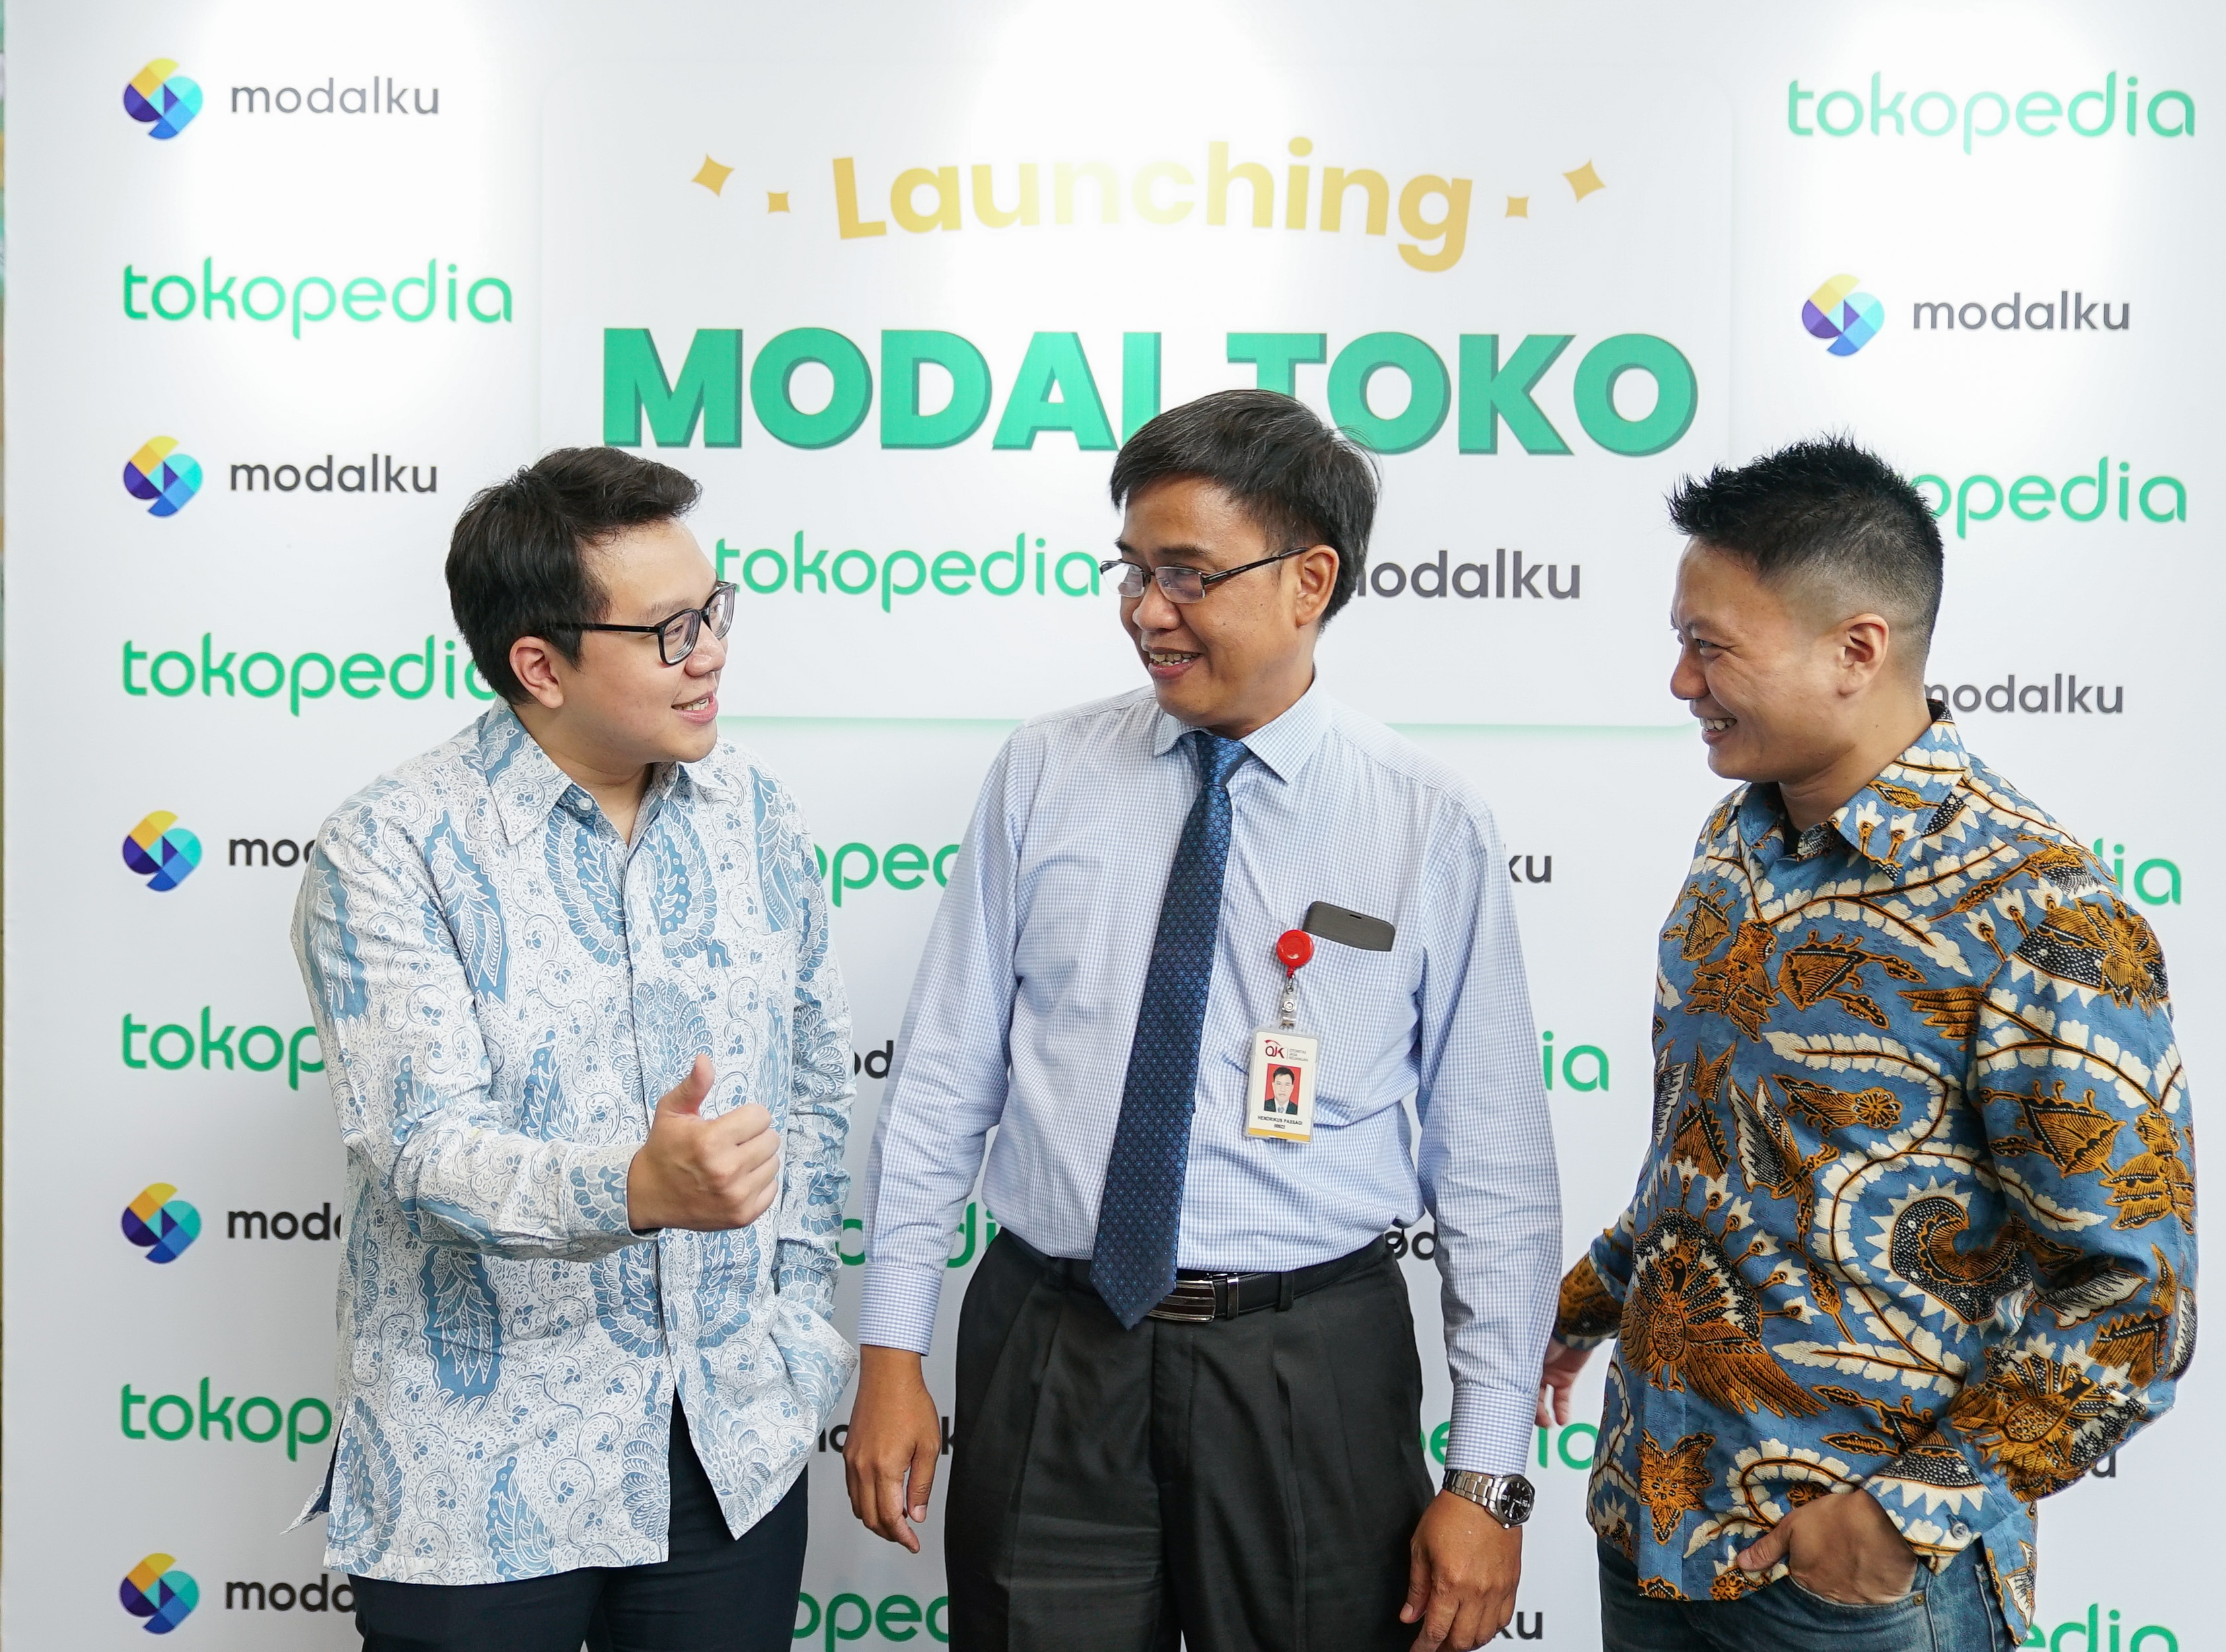 Tokopedia and P2P lender Modalku launch new SME financing product for capital loans